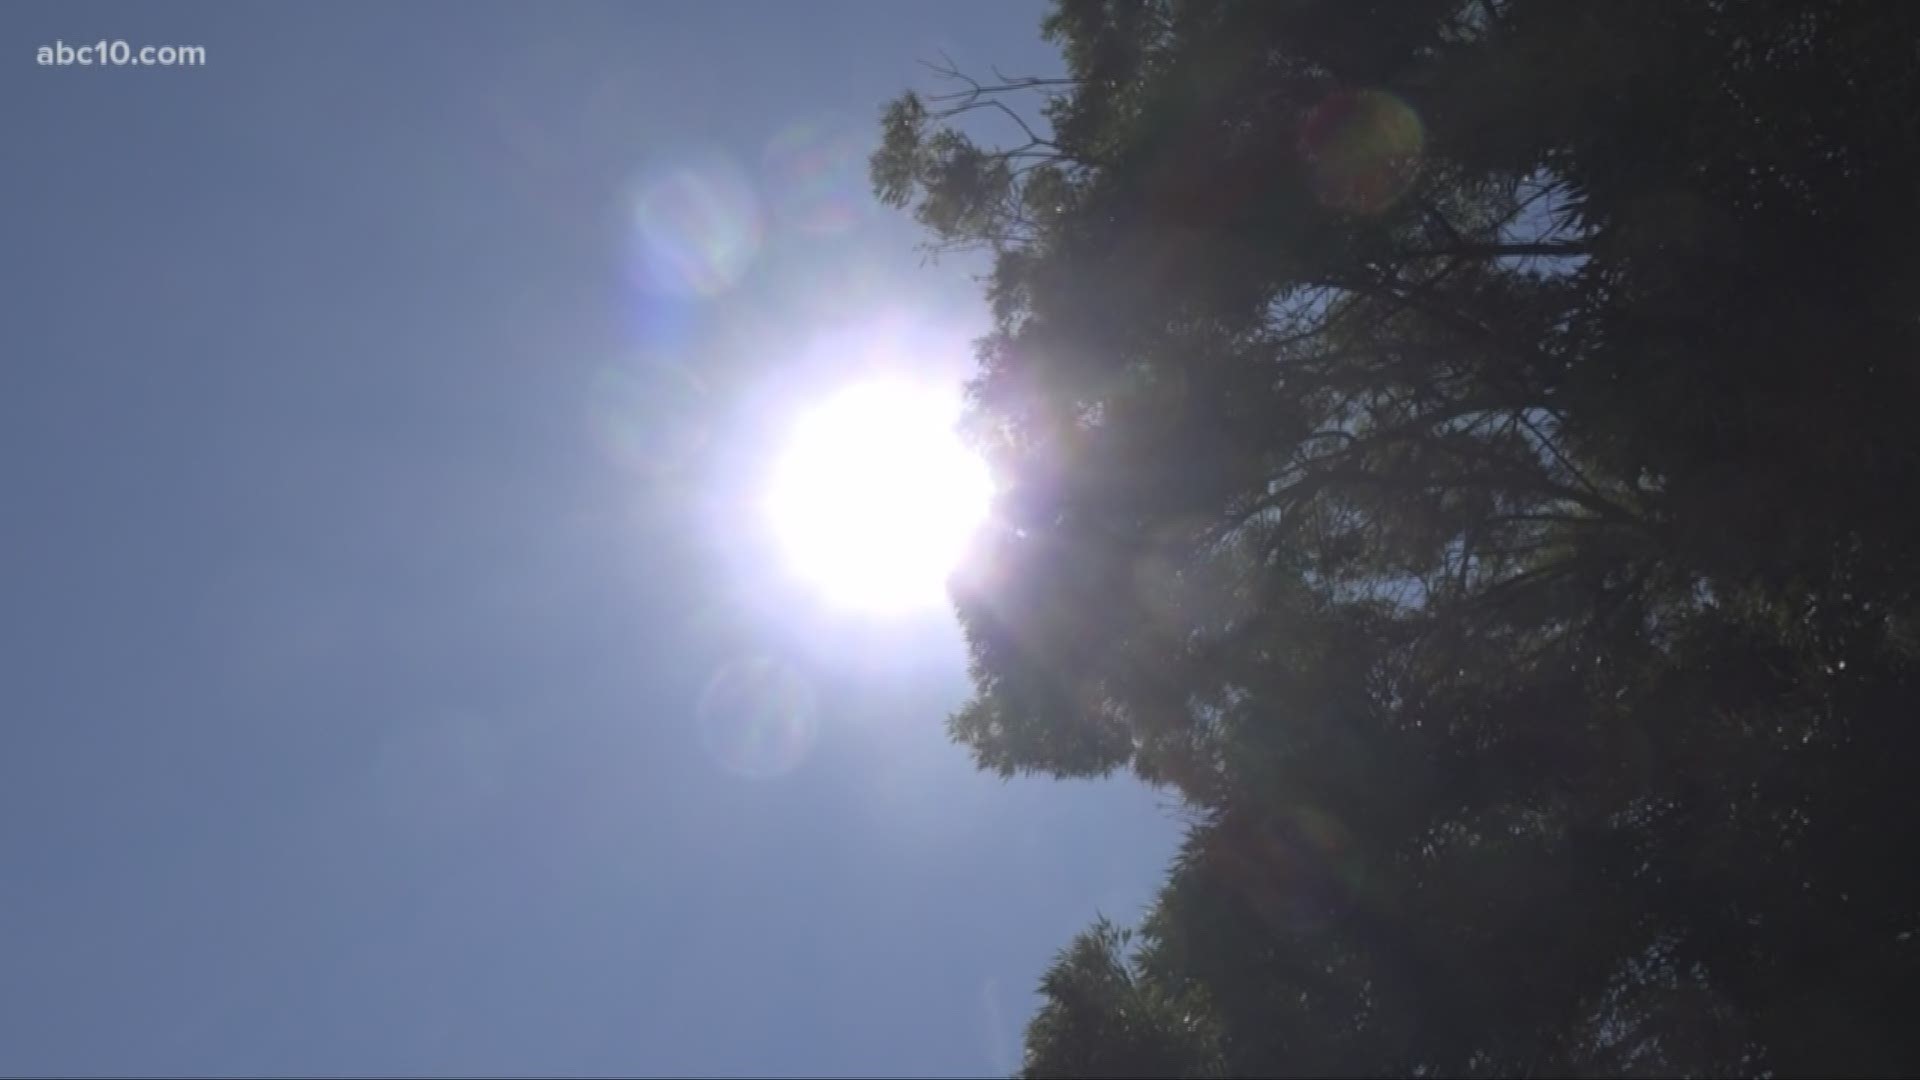 Cooling centers are not yet open in Sacramento, so people have to keep themselves cool in the heat. Check out some tips to keep cool and safe in the summer weather.